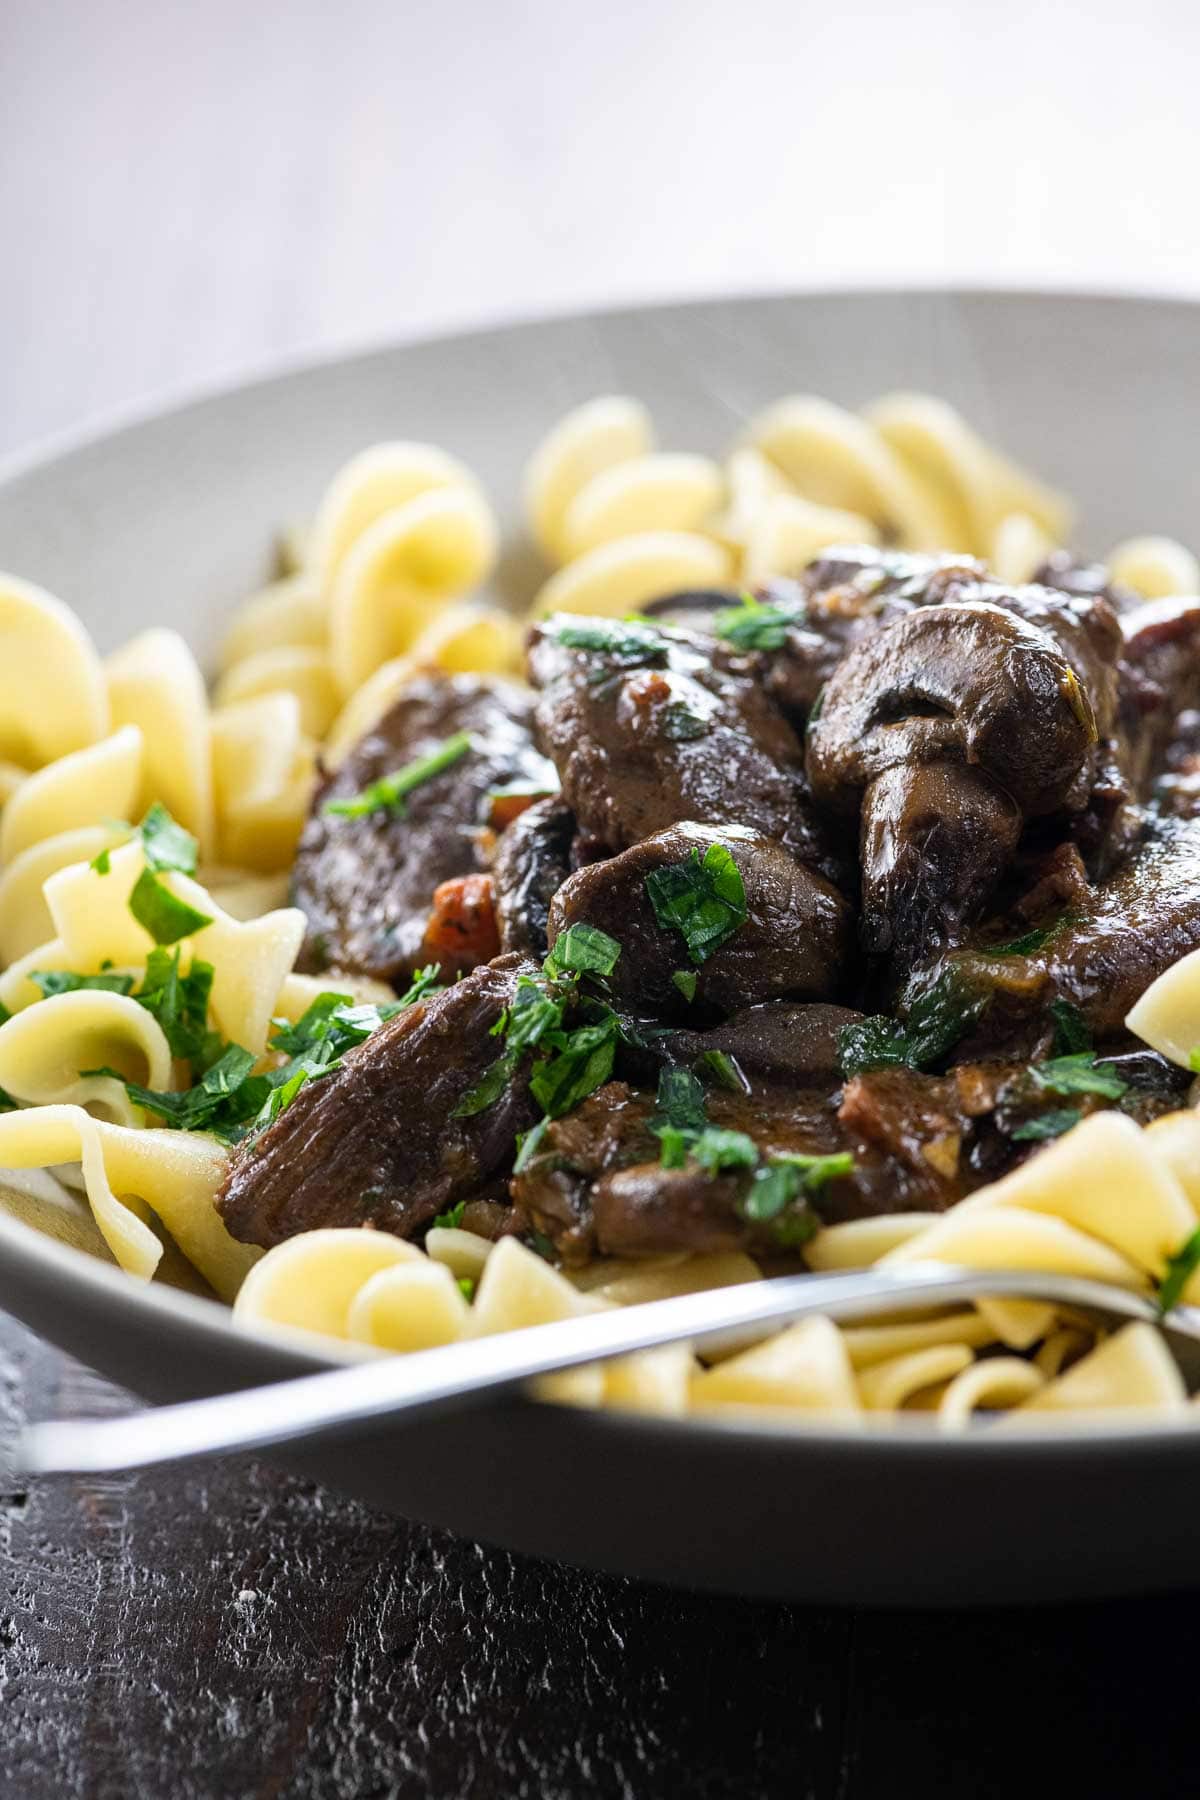 bouef bourguignon over egg noodles in a bowl with a fork